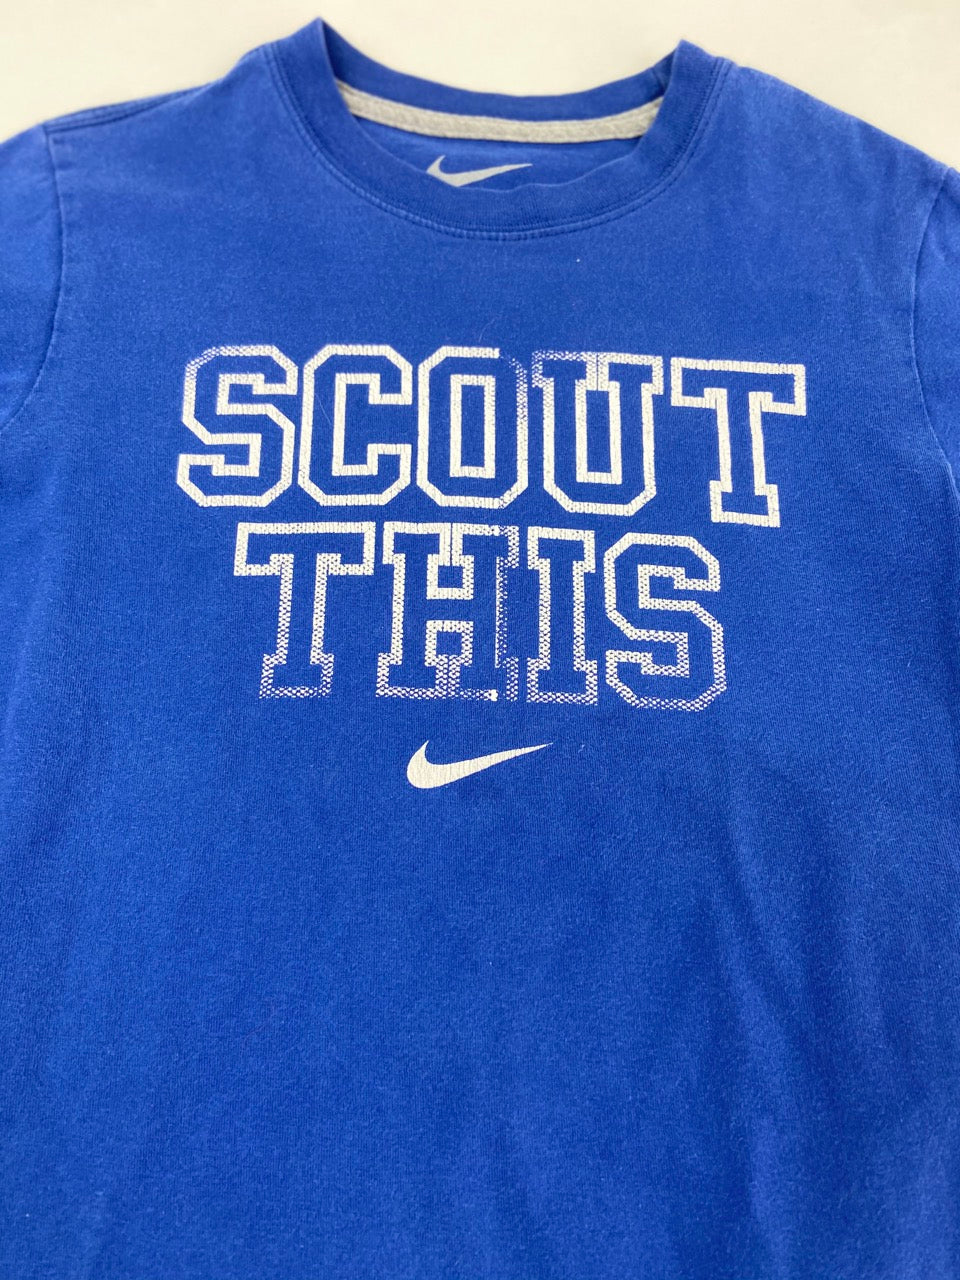 "Scout This" Nike Tee- Youth S